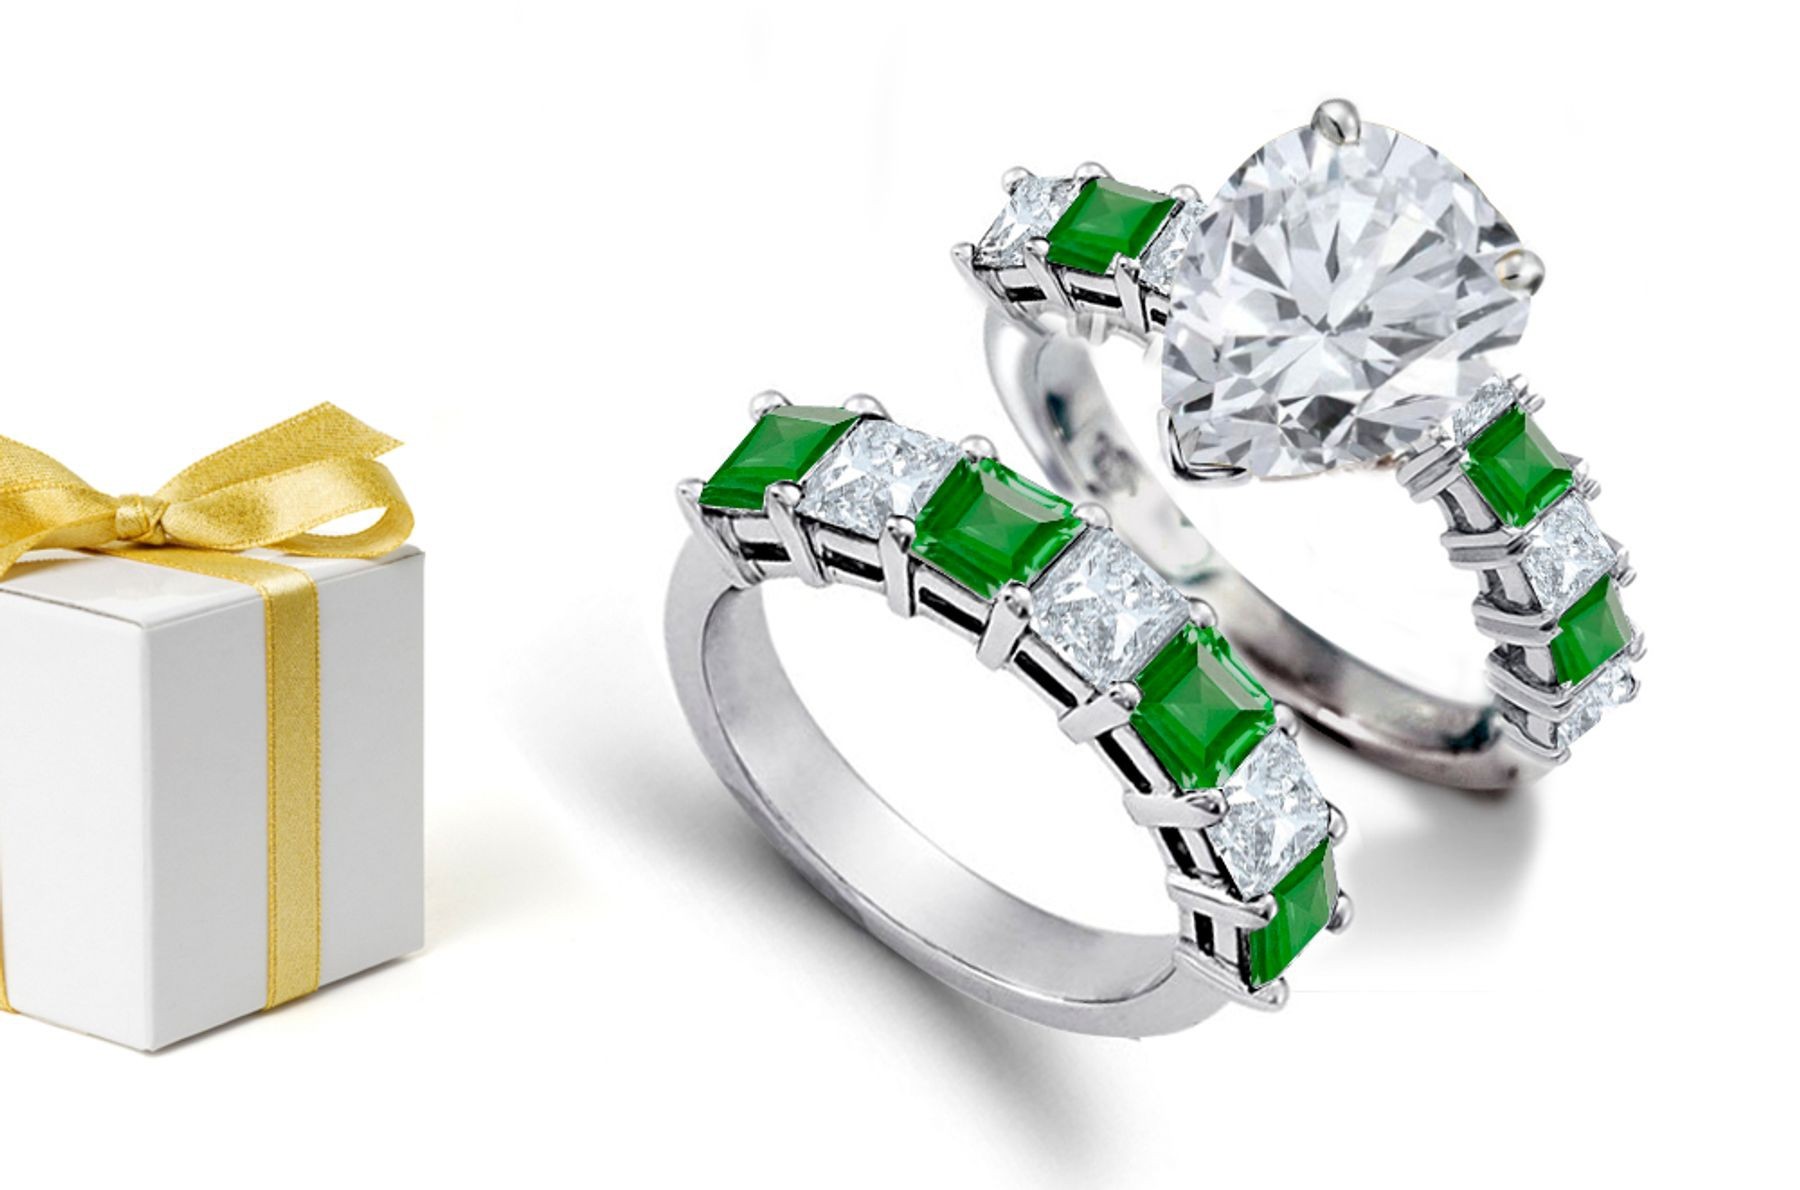 The Splendid Emeralds: Wonderful & Richly Designed Featuring Center Pear-Shaped Diamond With Square Emeralds Set in Two Gold Rings